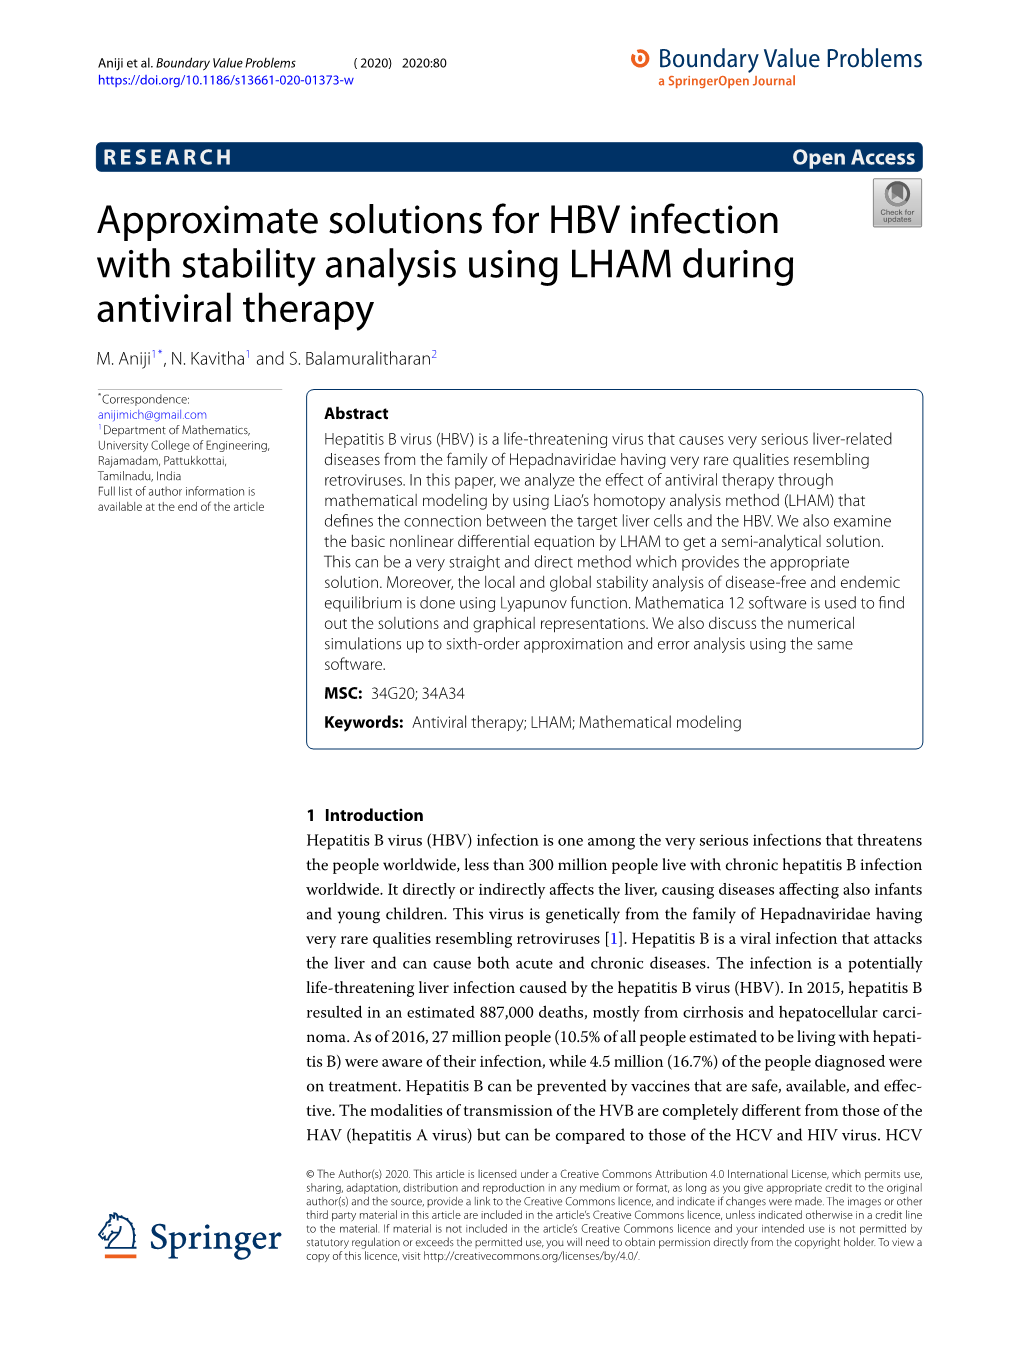 Approximate Solutions for HBV Infection with Stability Analysis Using LHAM During Antiviral Therapy